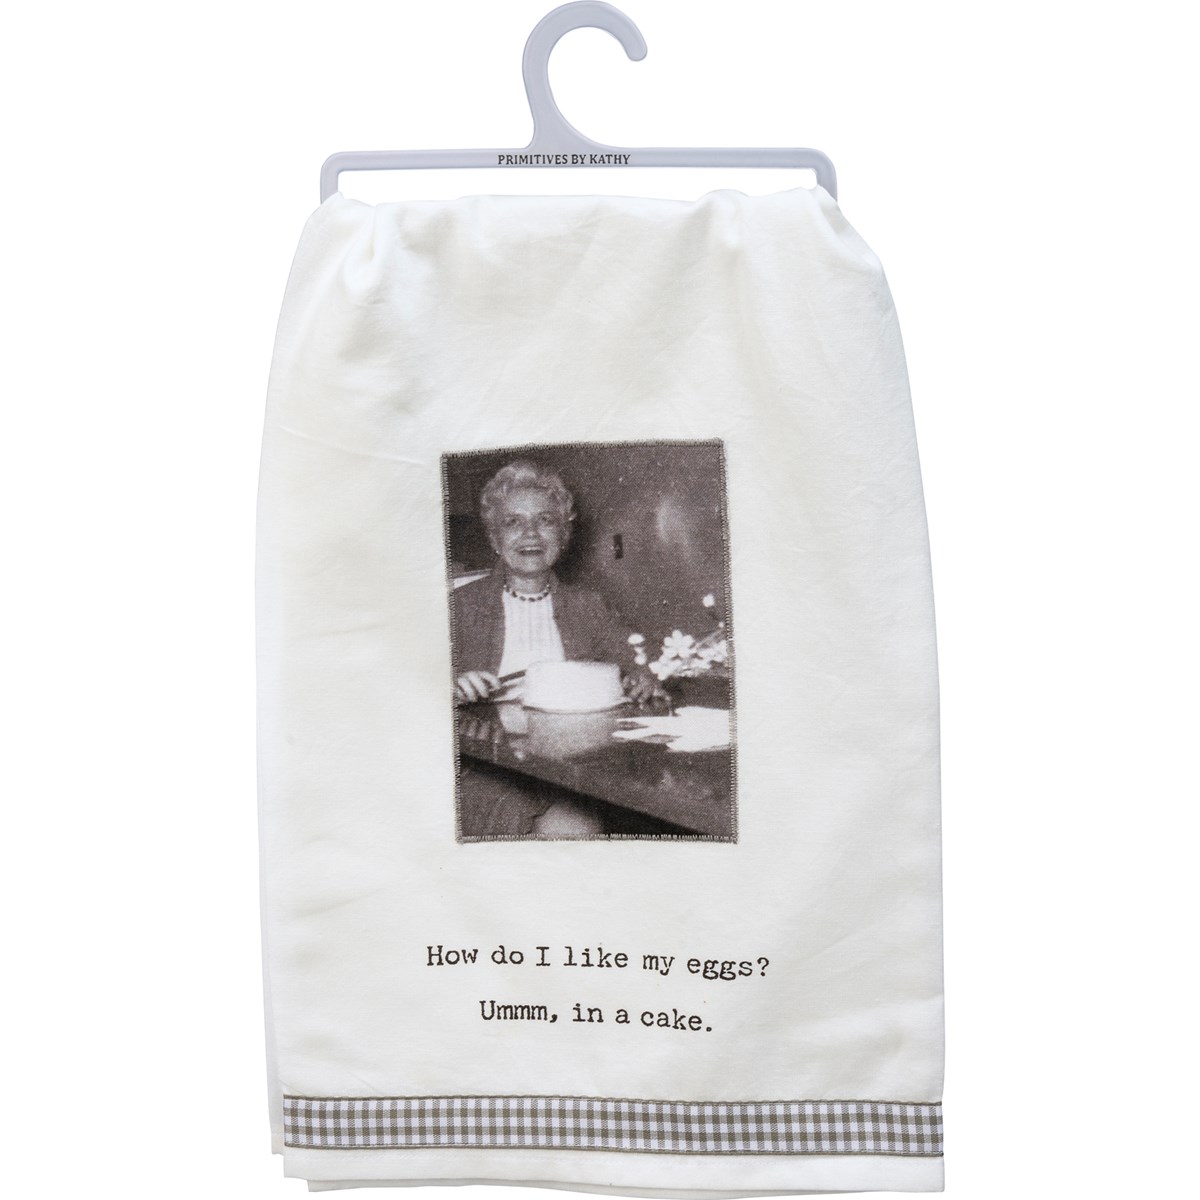 Kitchen Towel - I Like My Eggs In A Cake - 28" x 28" - Cotton